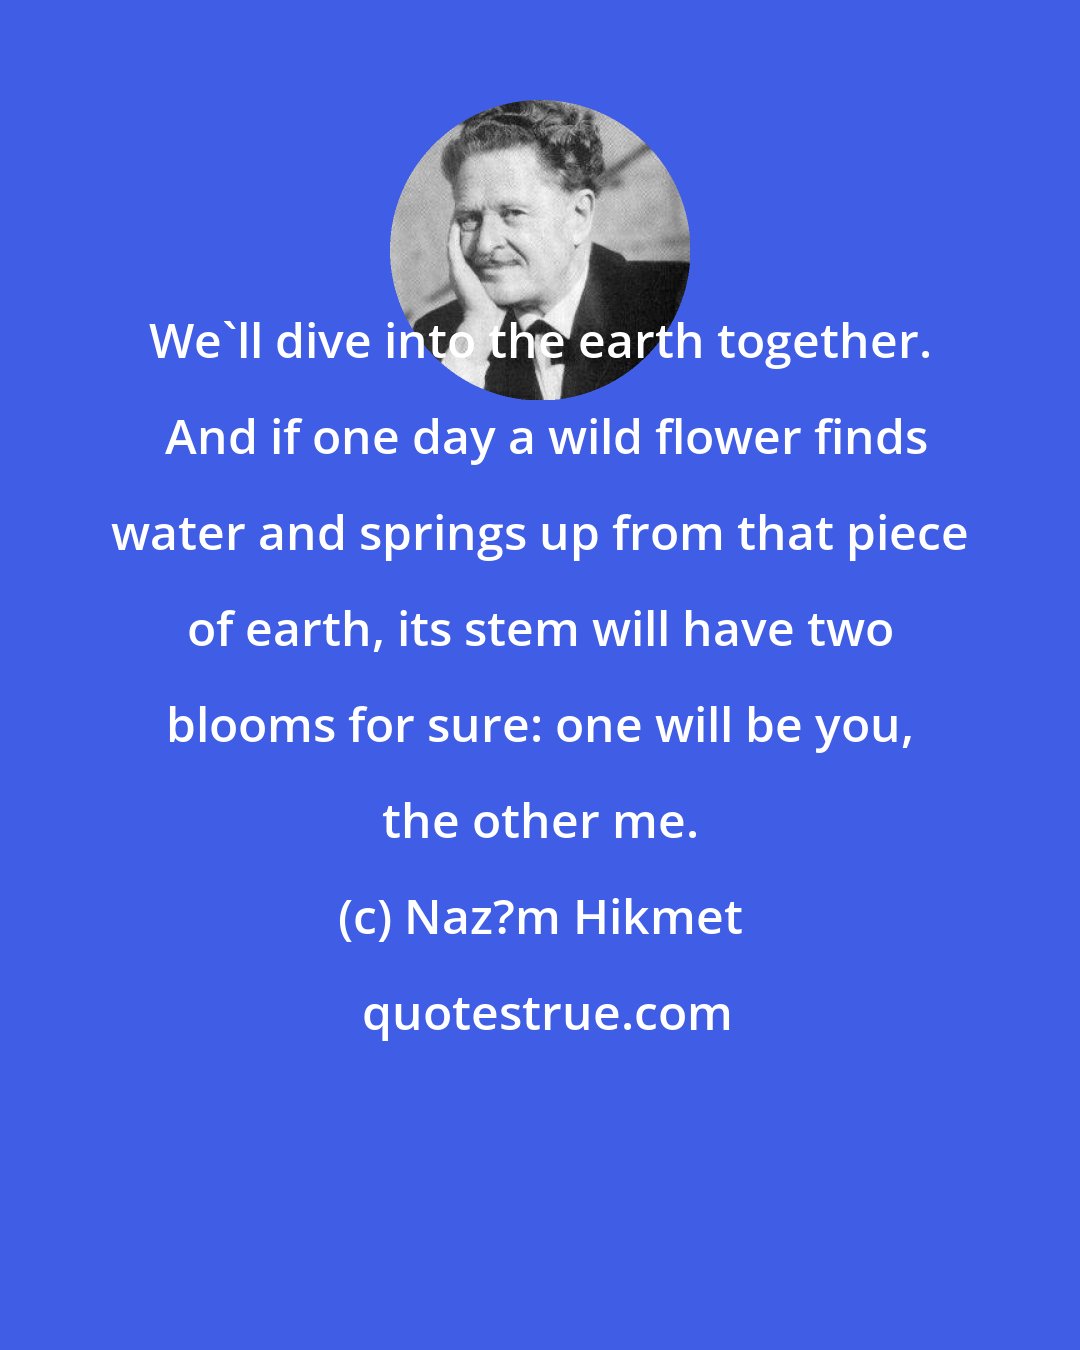 Naz?m Hikmet: We'll dive into the earth together.  And if one day a wild flower finds water and springs up from that piece of earth, its stem will have two blooms for sure: one will be you, the other me.